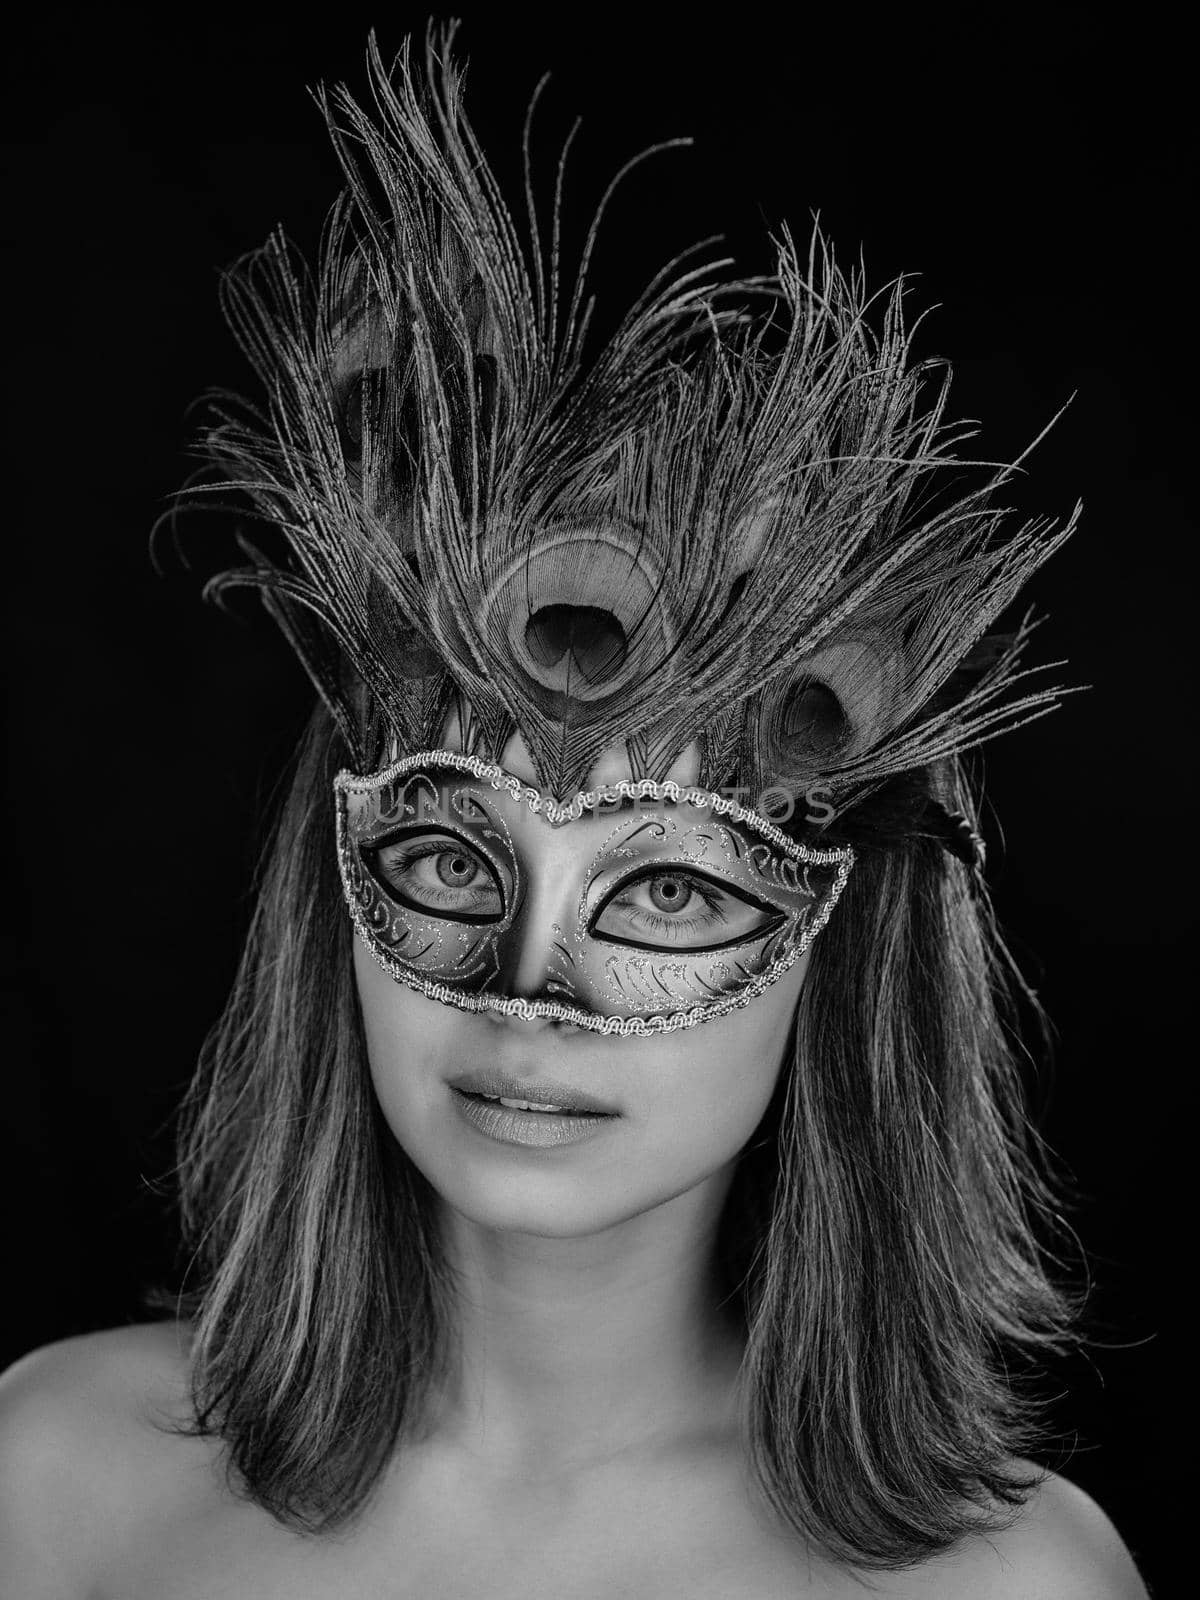 Black and white close-up portrait of a beautiful green-eyed woman in a Venetian carnival mask by zartarn